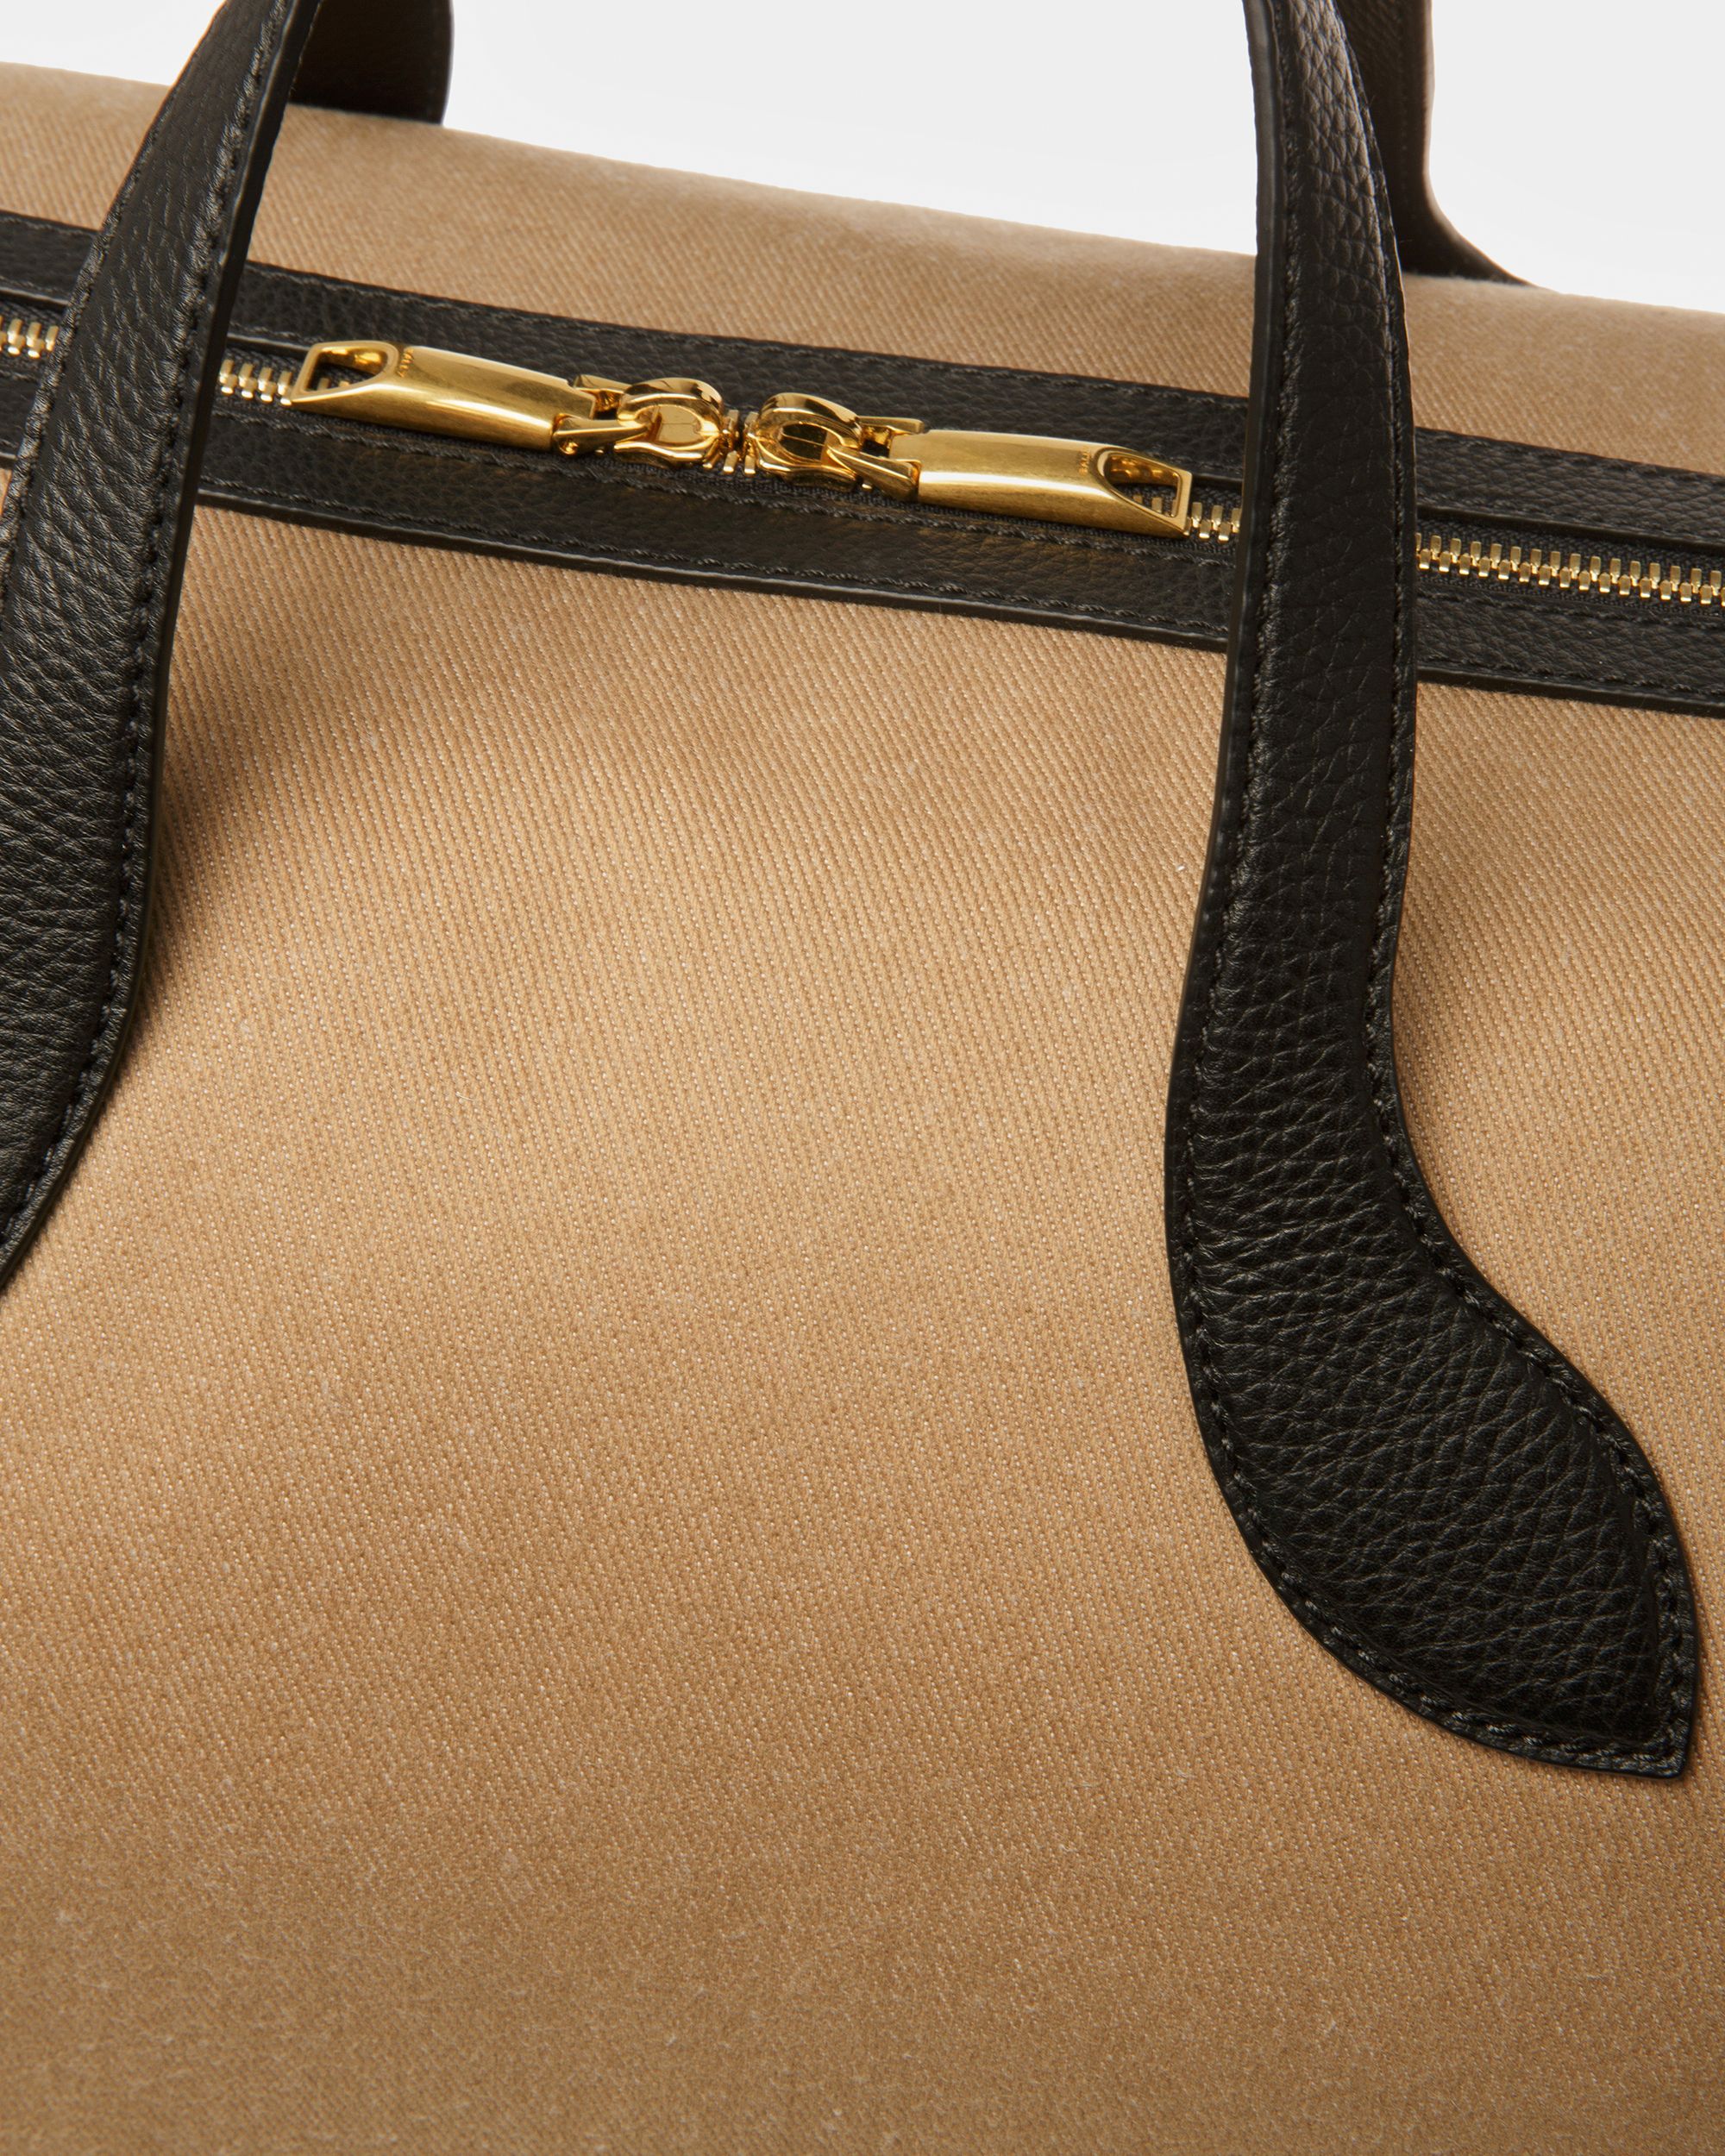 36 Hours | Men's Travel Bag | Sand And Black Fabric And Leather | Bally | Still Life Detail